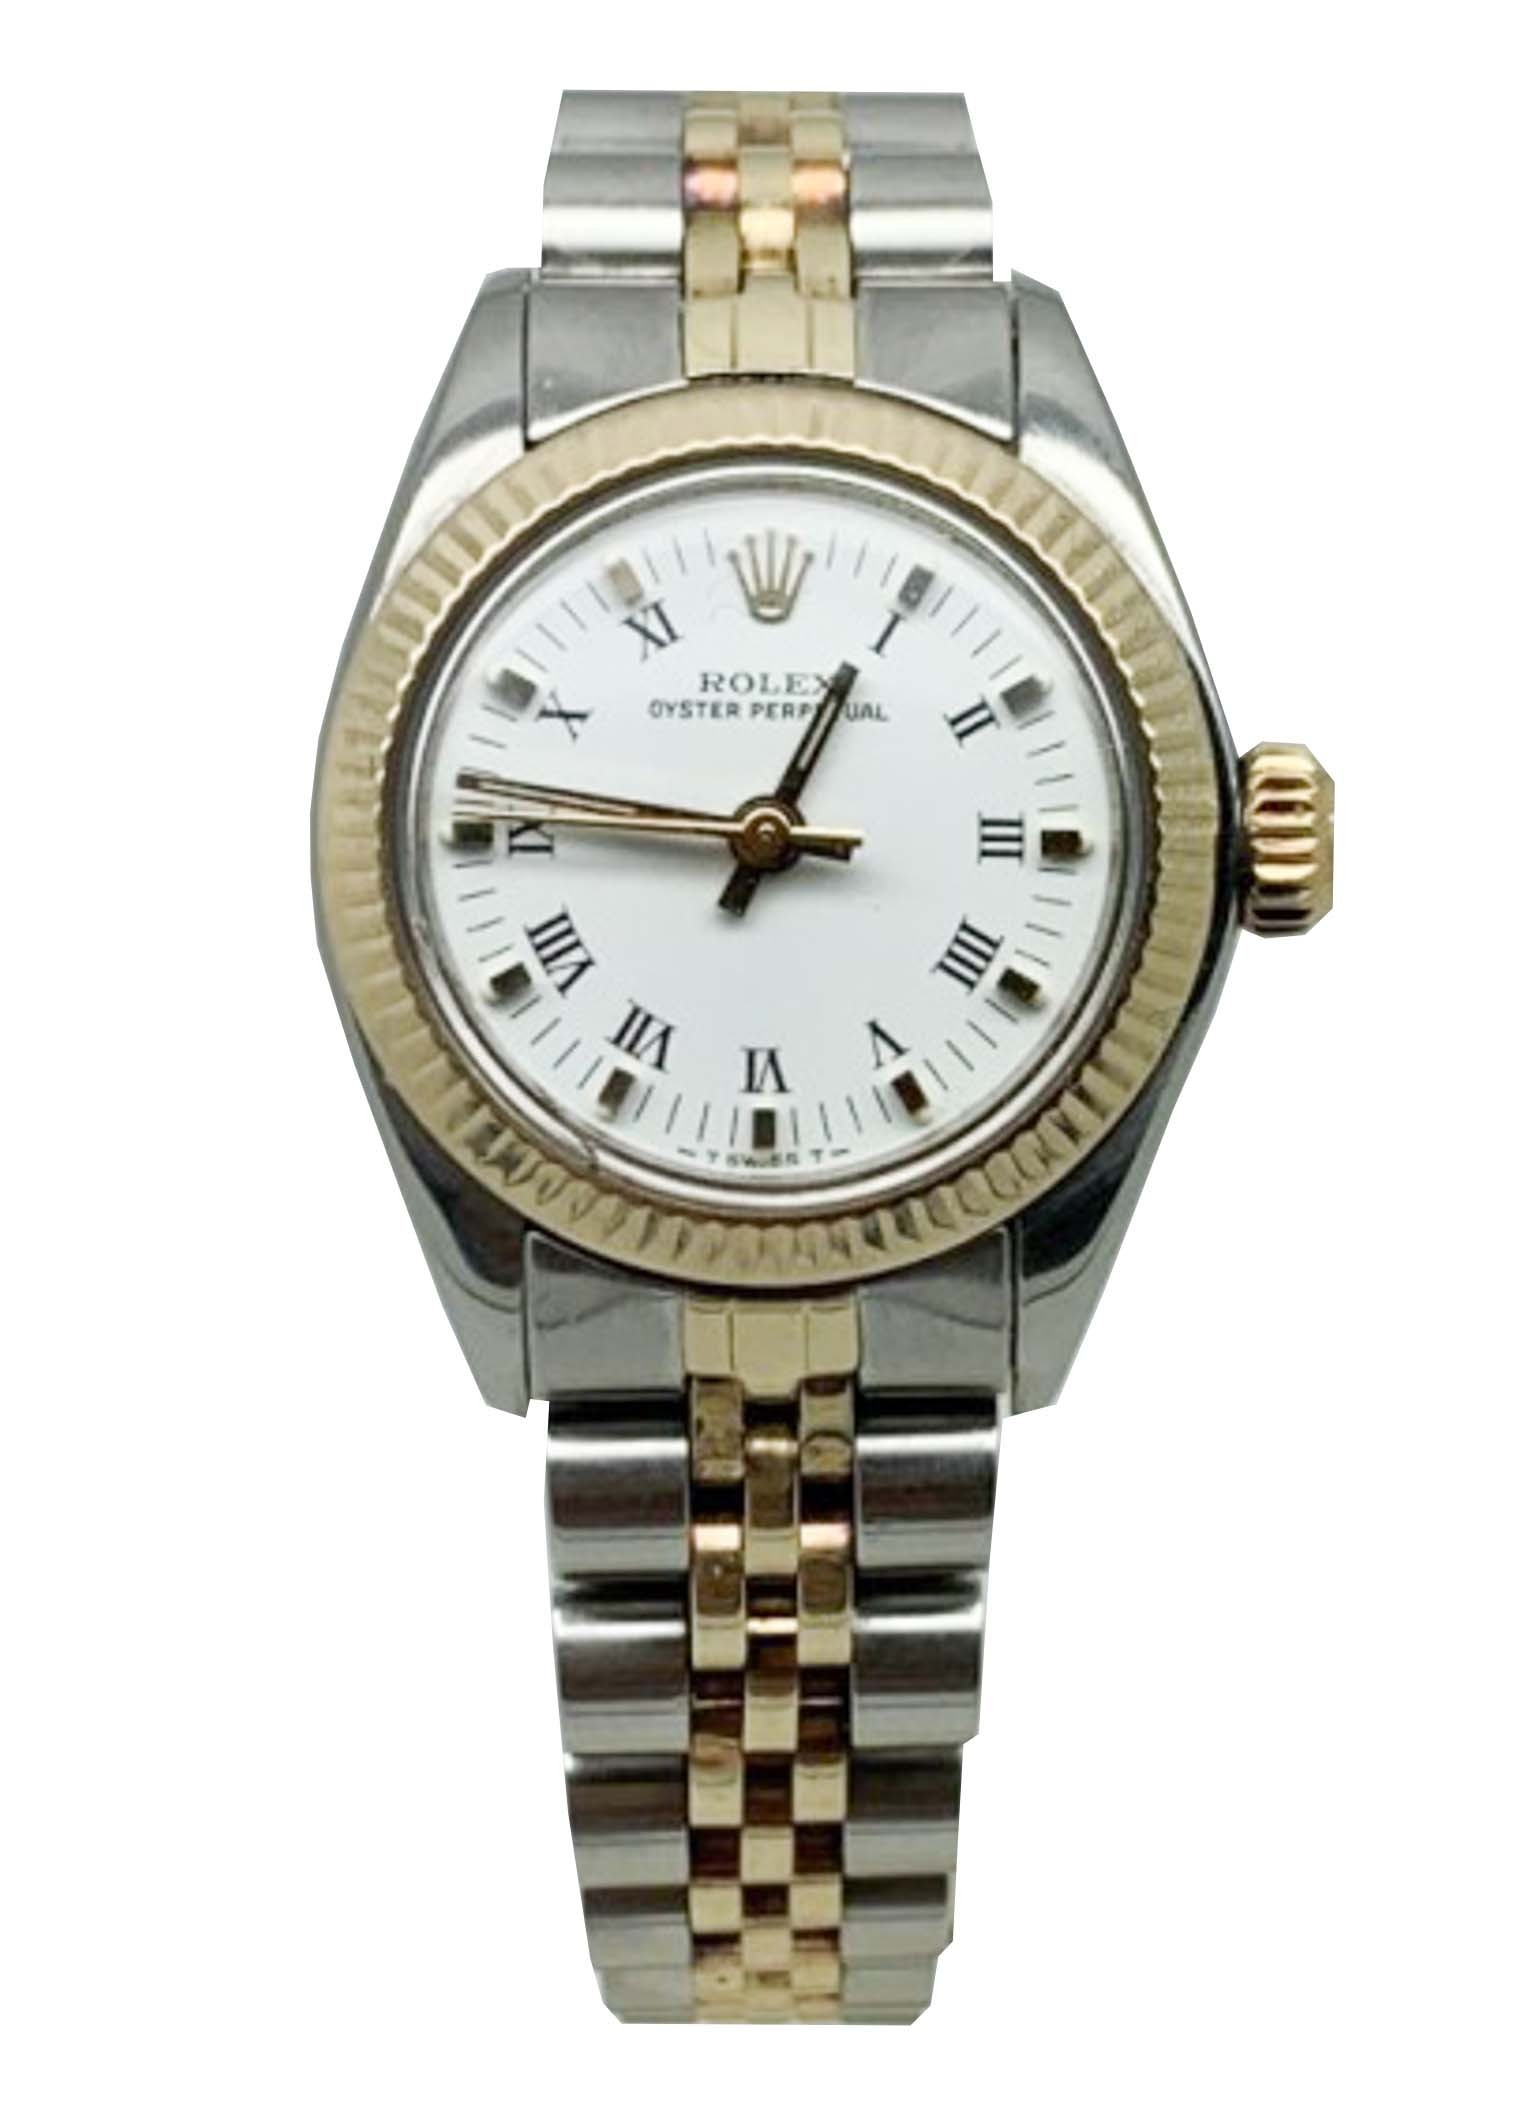 Rolex Oyster Perpetual Lady 6719 5686 